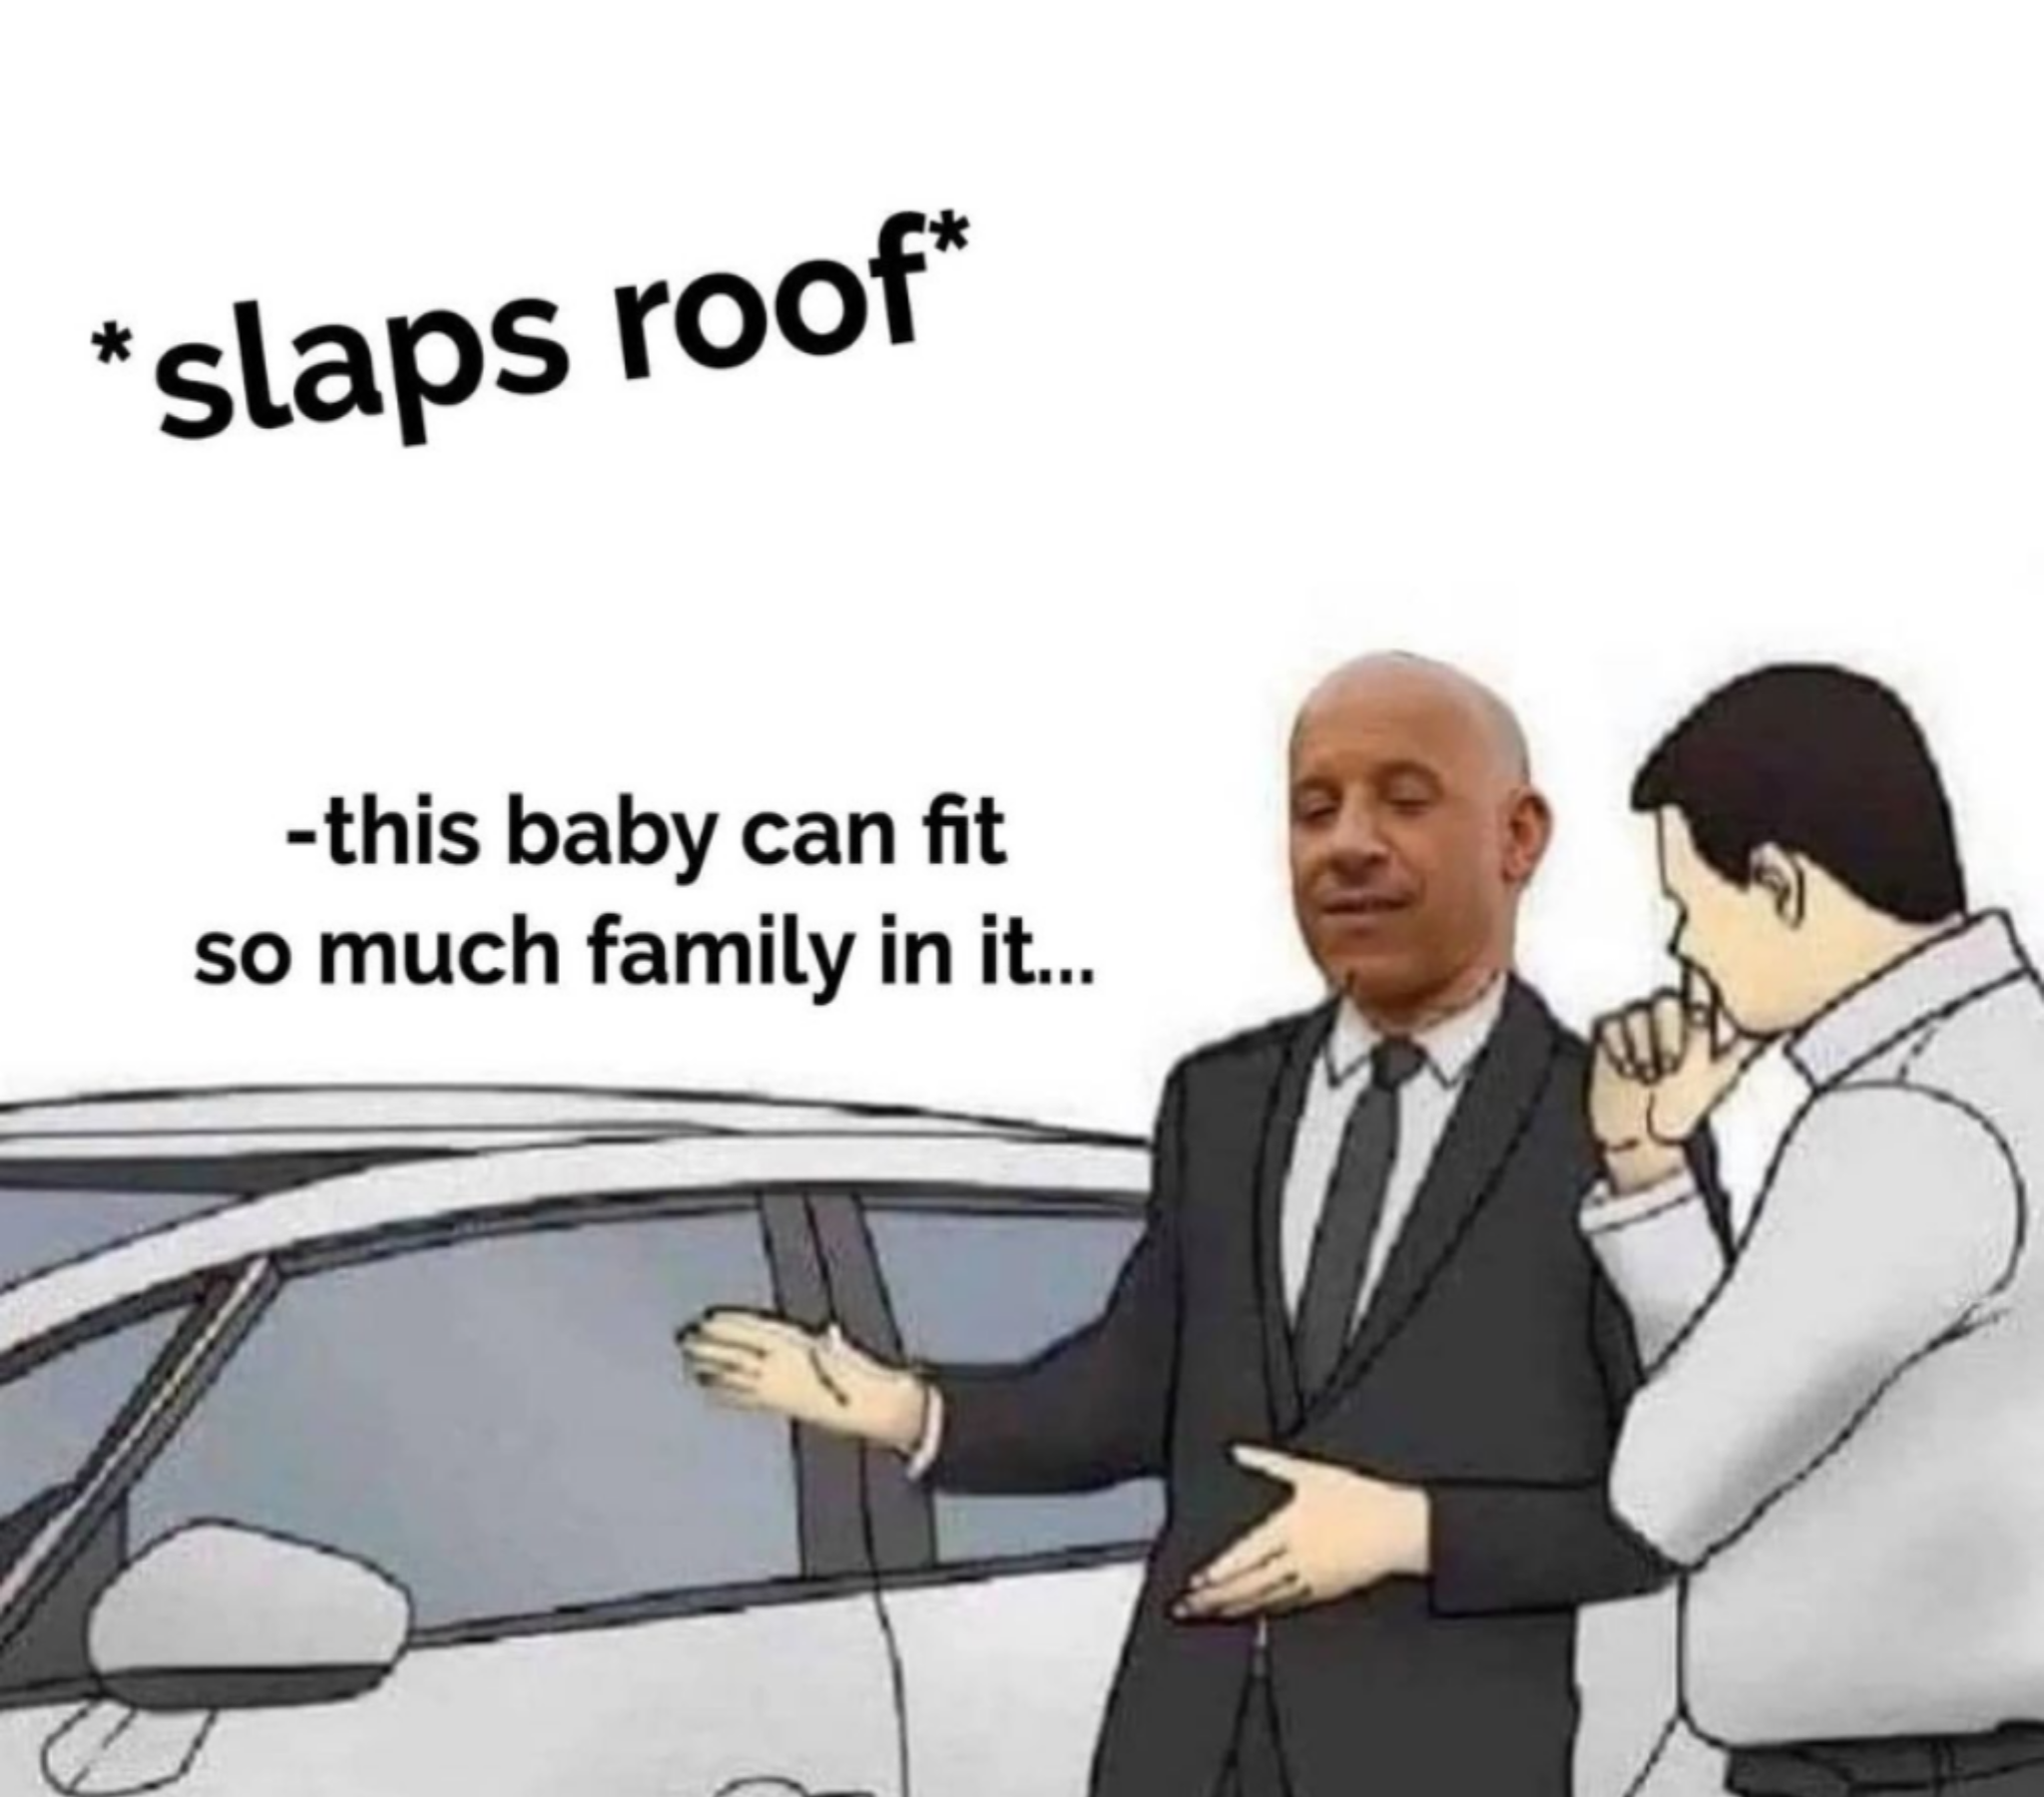 funny memes and pics - postmodernism memes - slaps roof this baby can fit so much family in it...